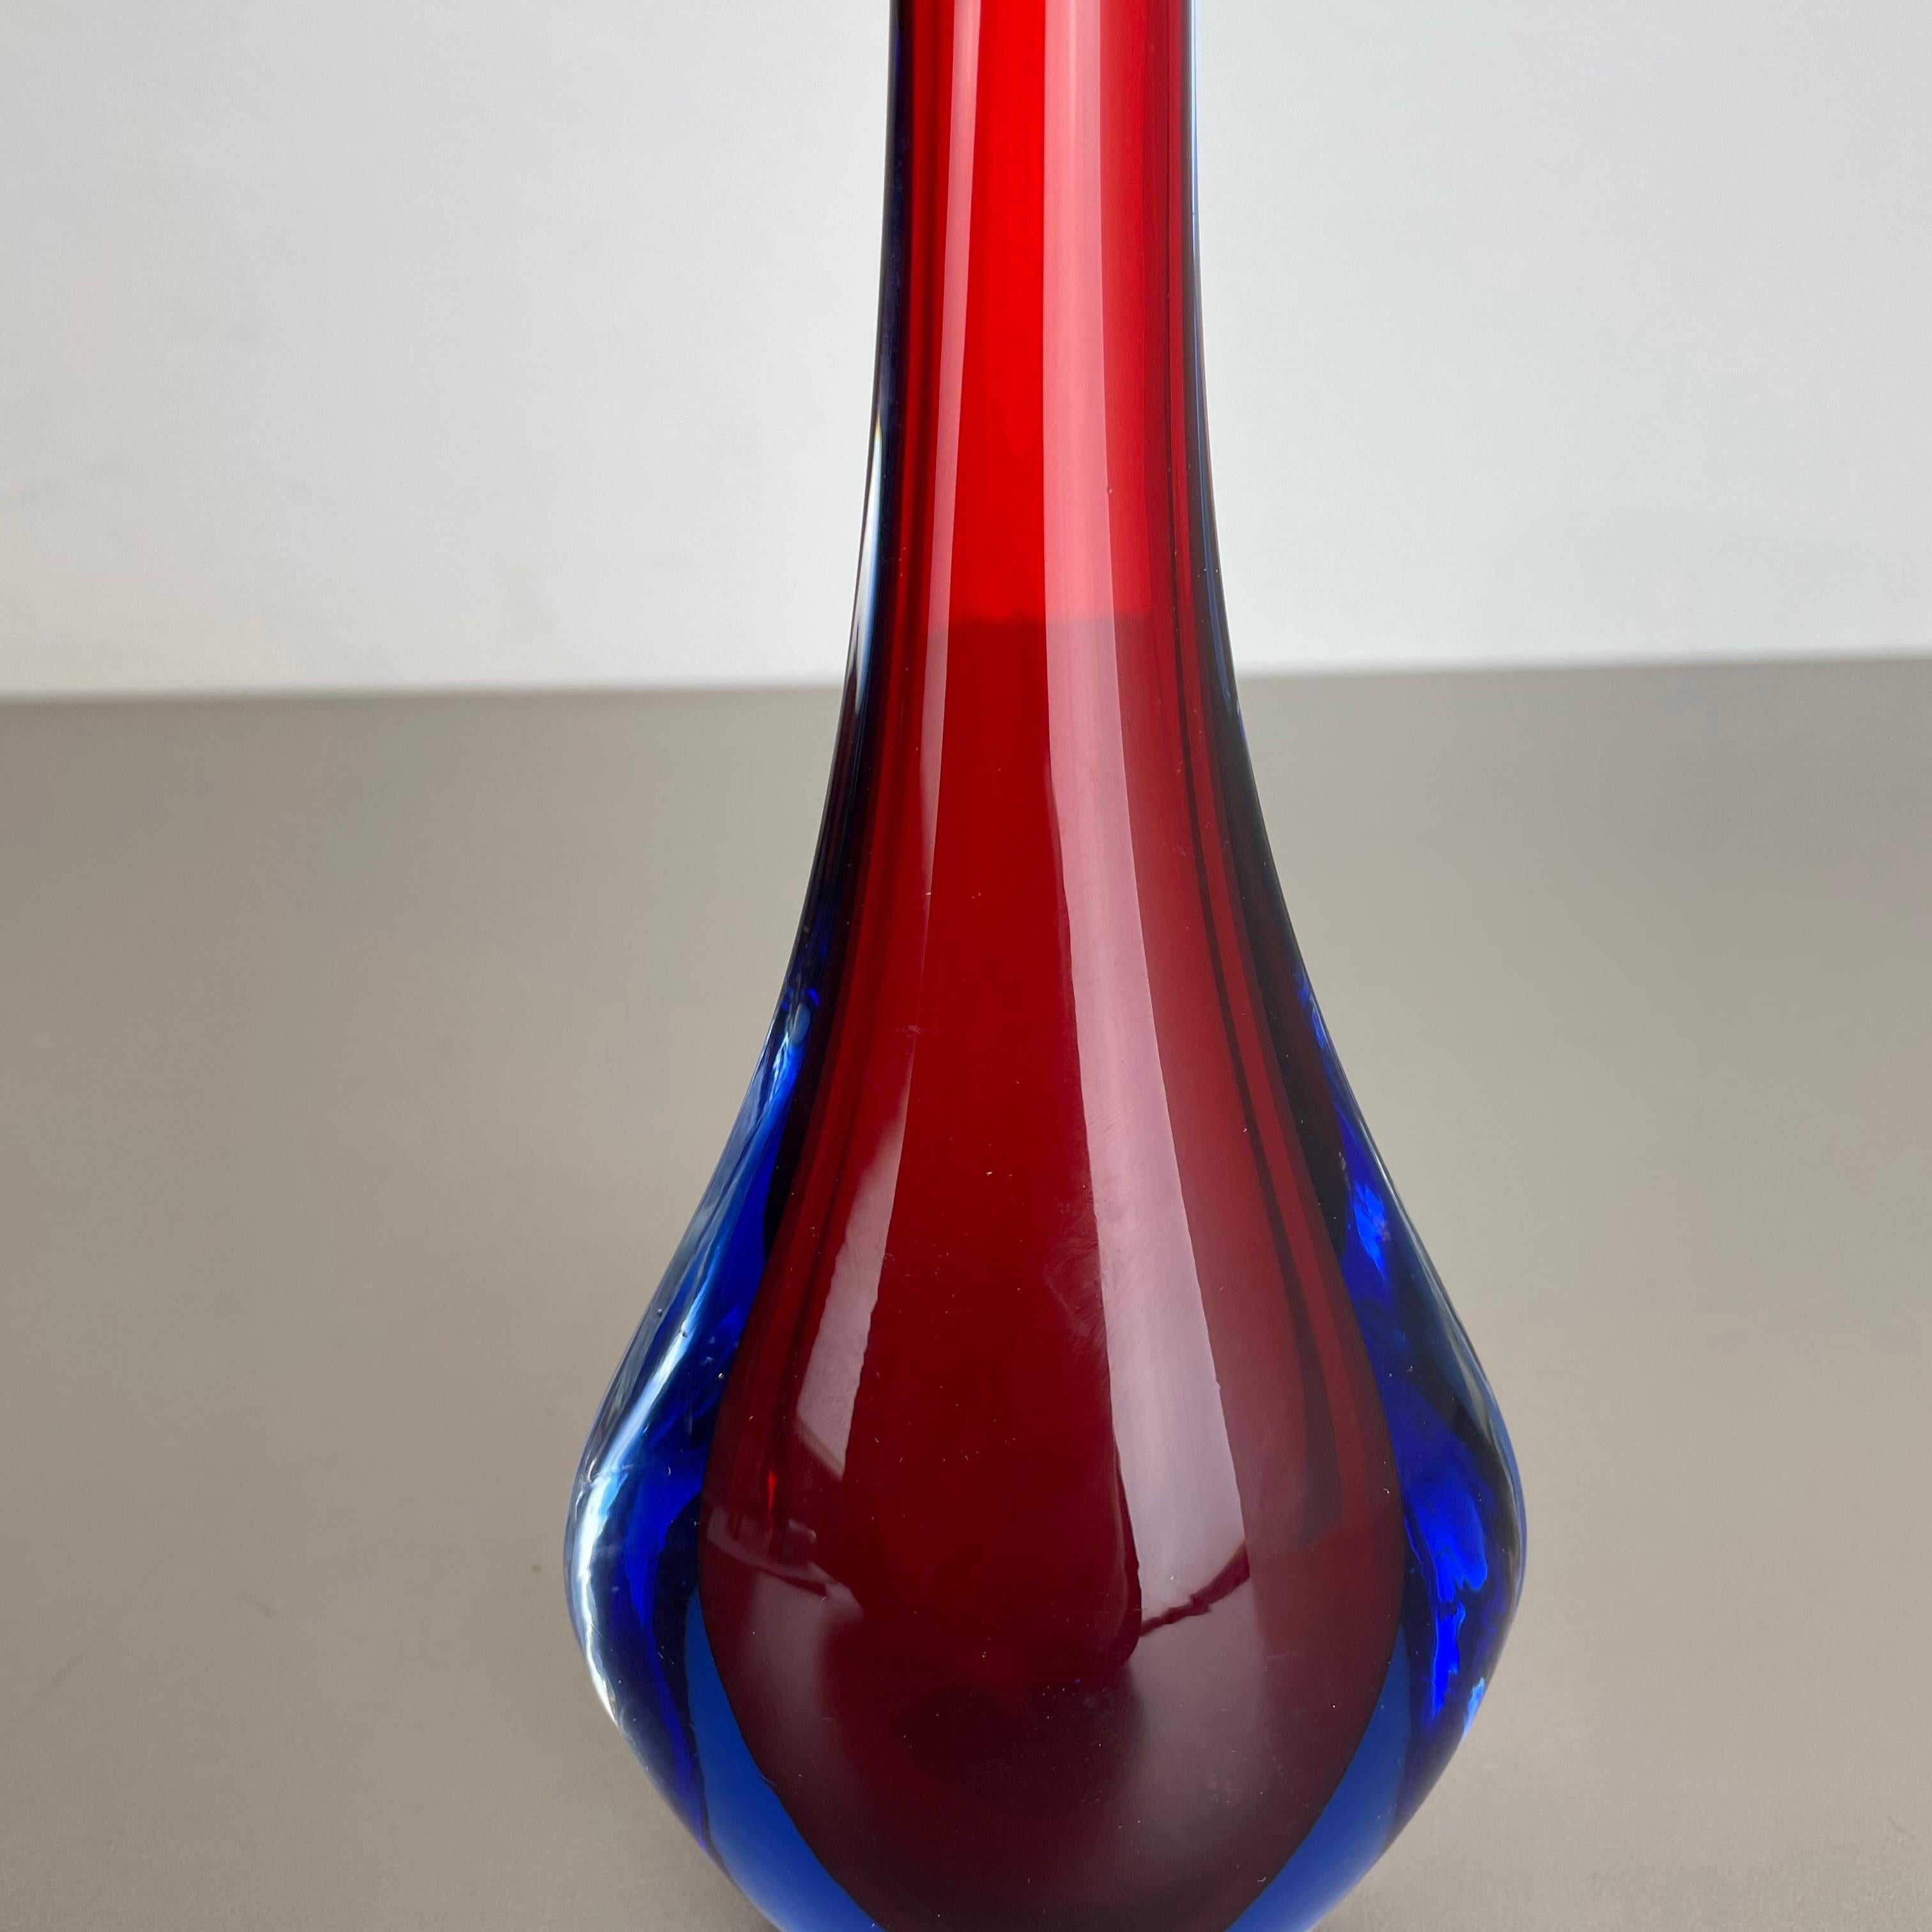 Large 1960s Murano Glass Sommerso 29cm Single-Stem Vase by Flavio Poli, Italy For Sale 2